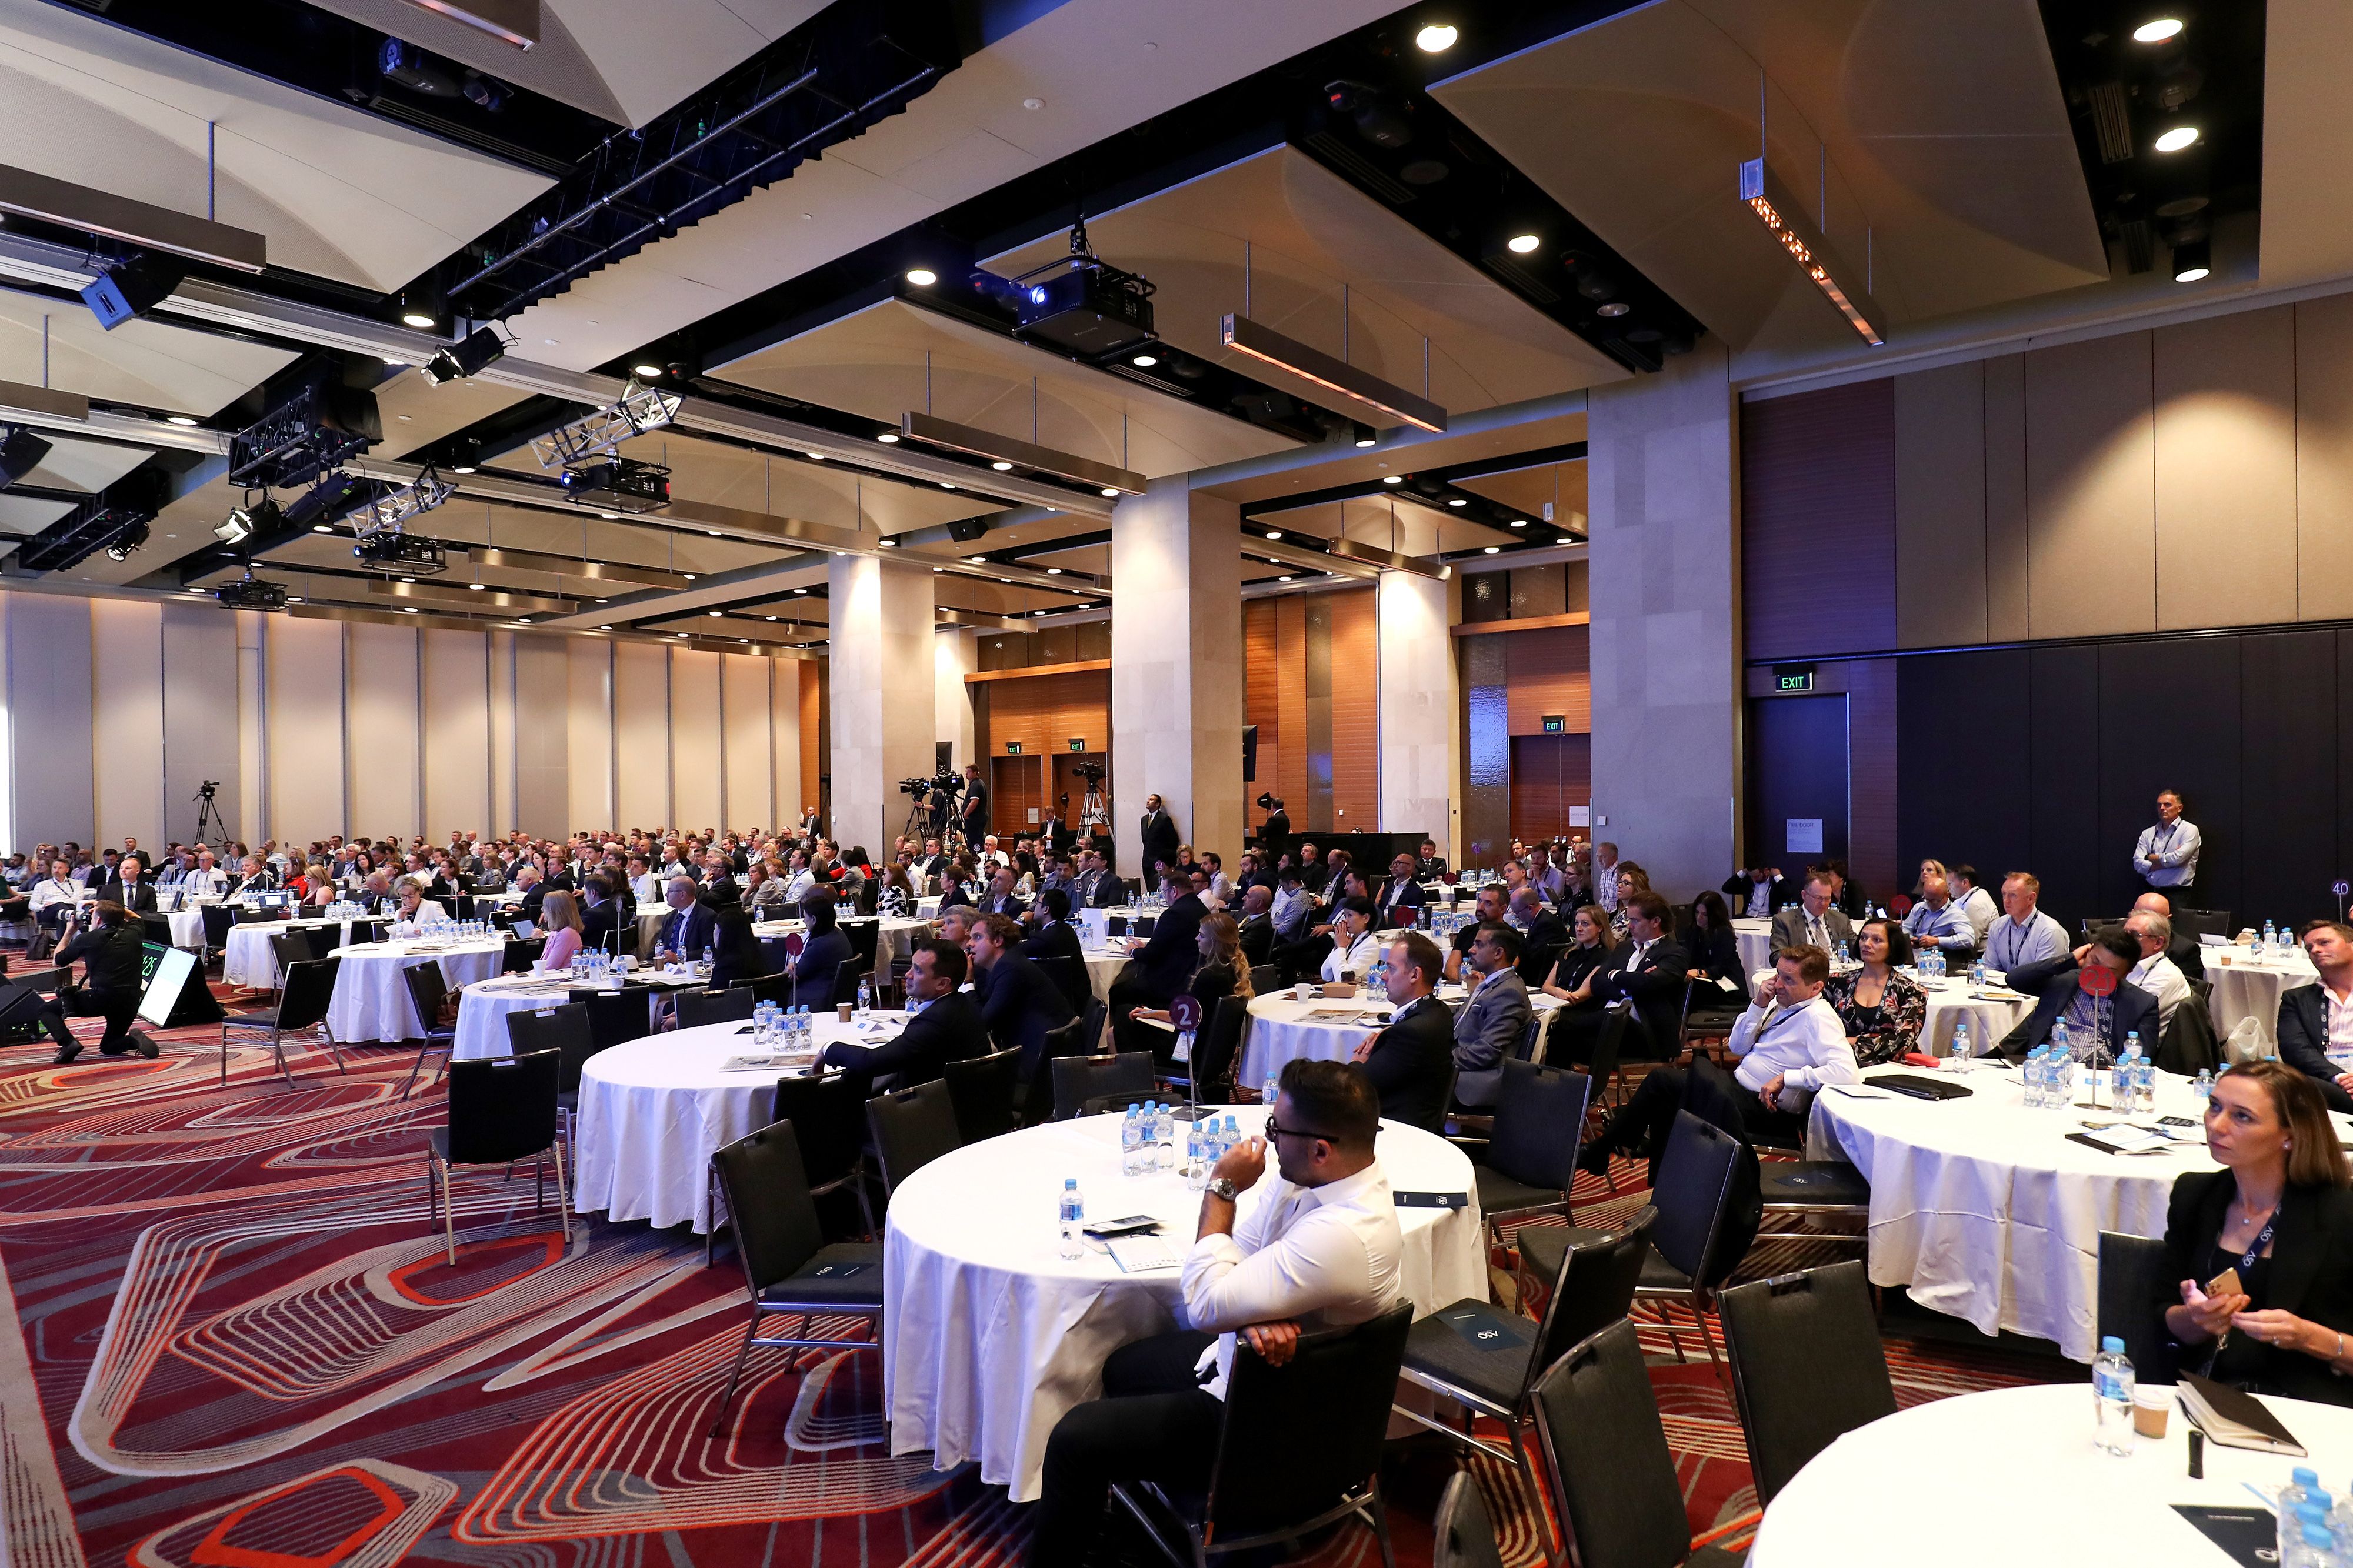  Attendees at the AFR Summit in Sydney, Australia, on Tuesday, March 9